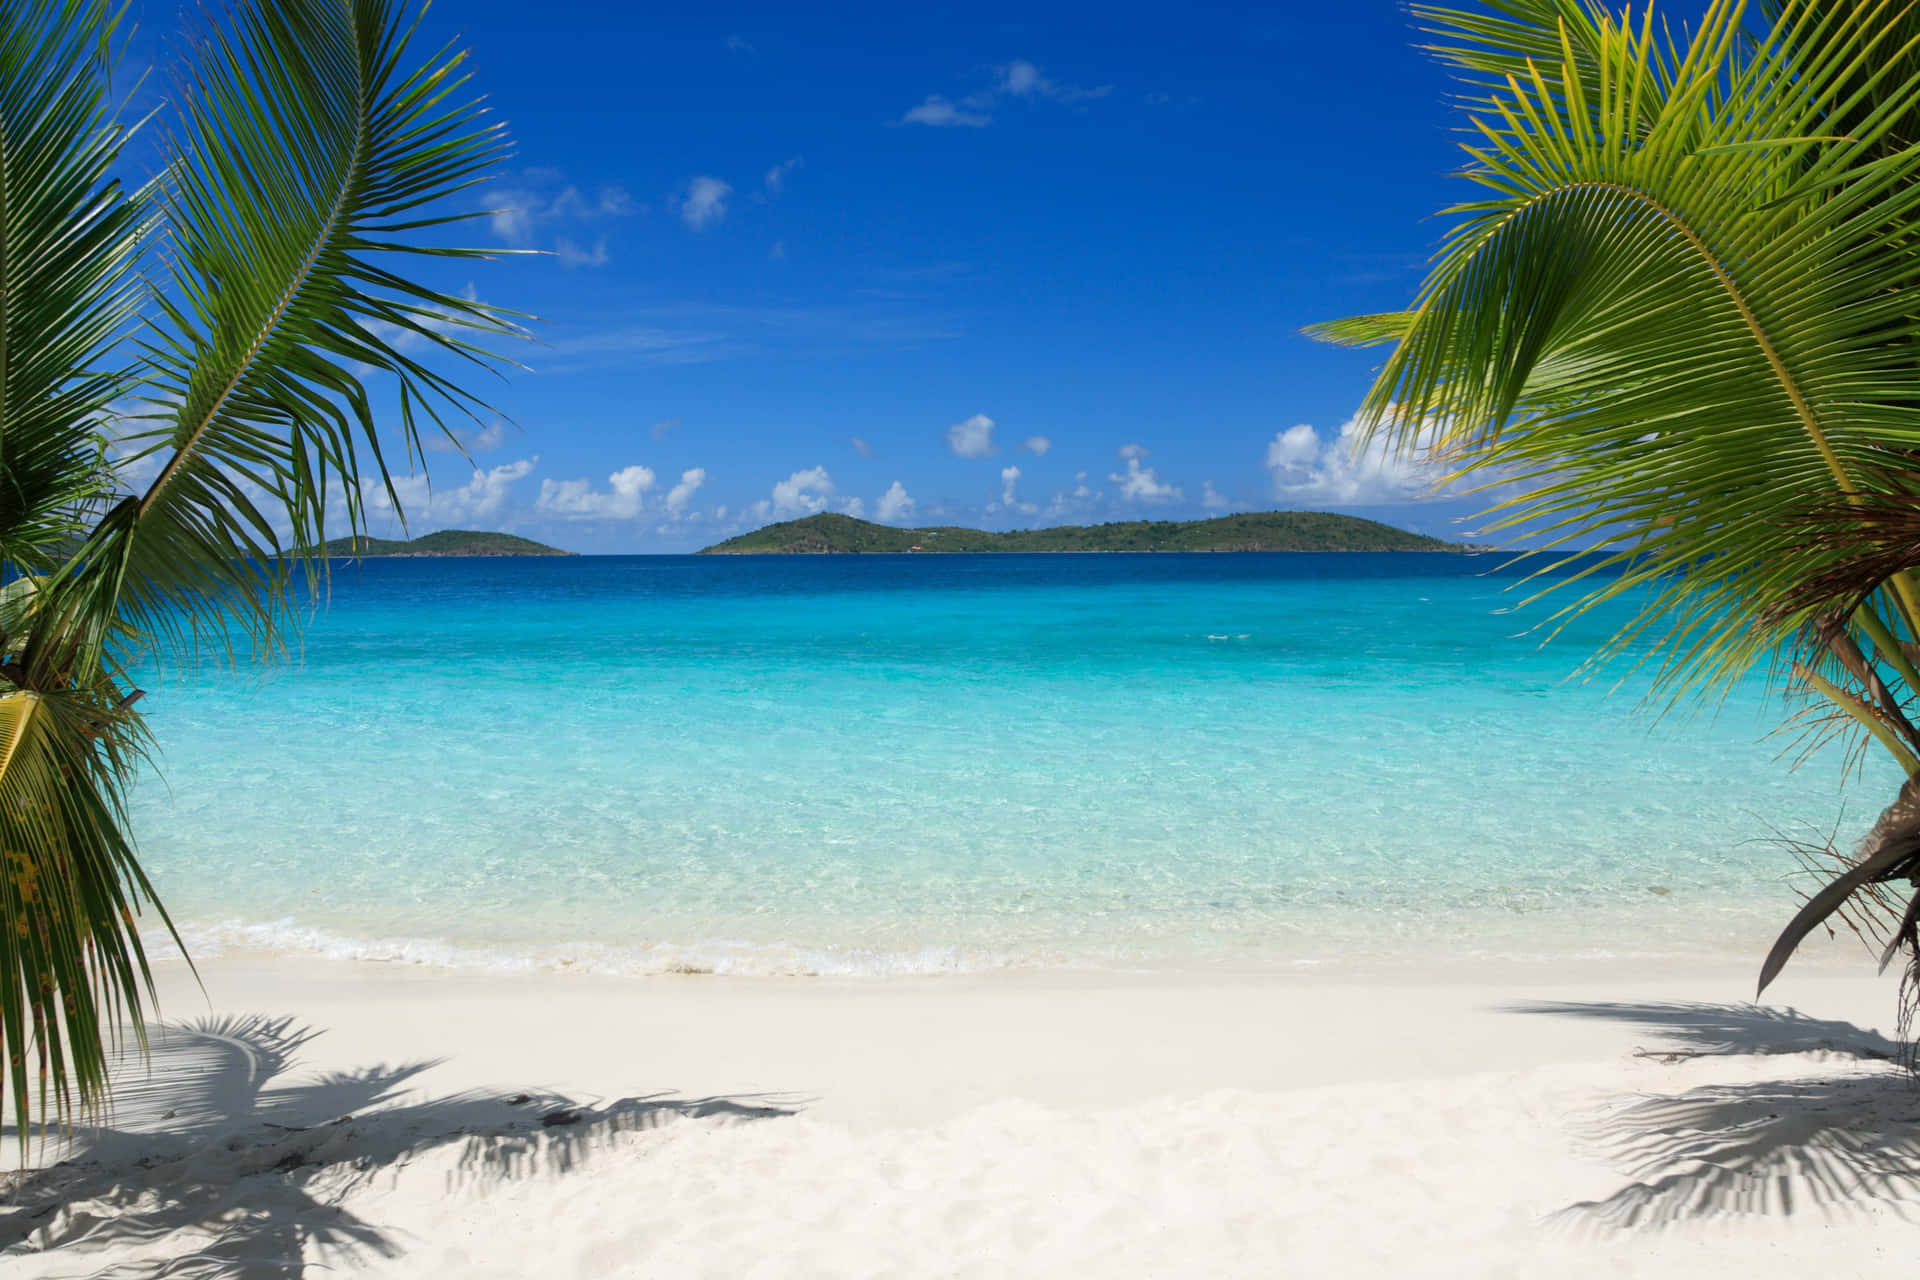 Take a break and relax on the palm tree beach! Wallpaper